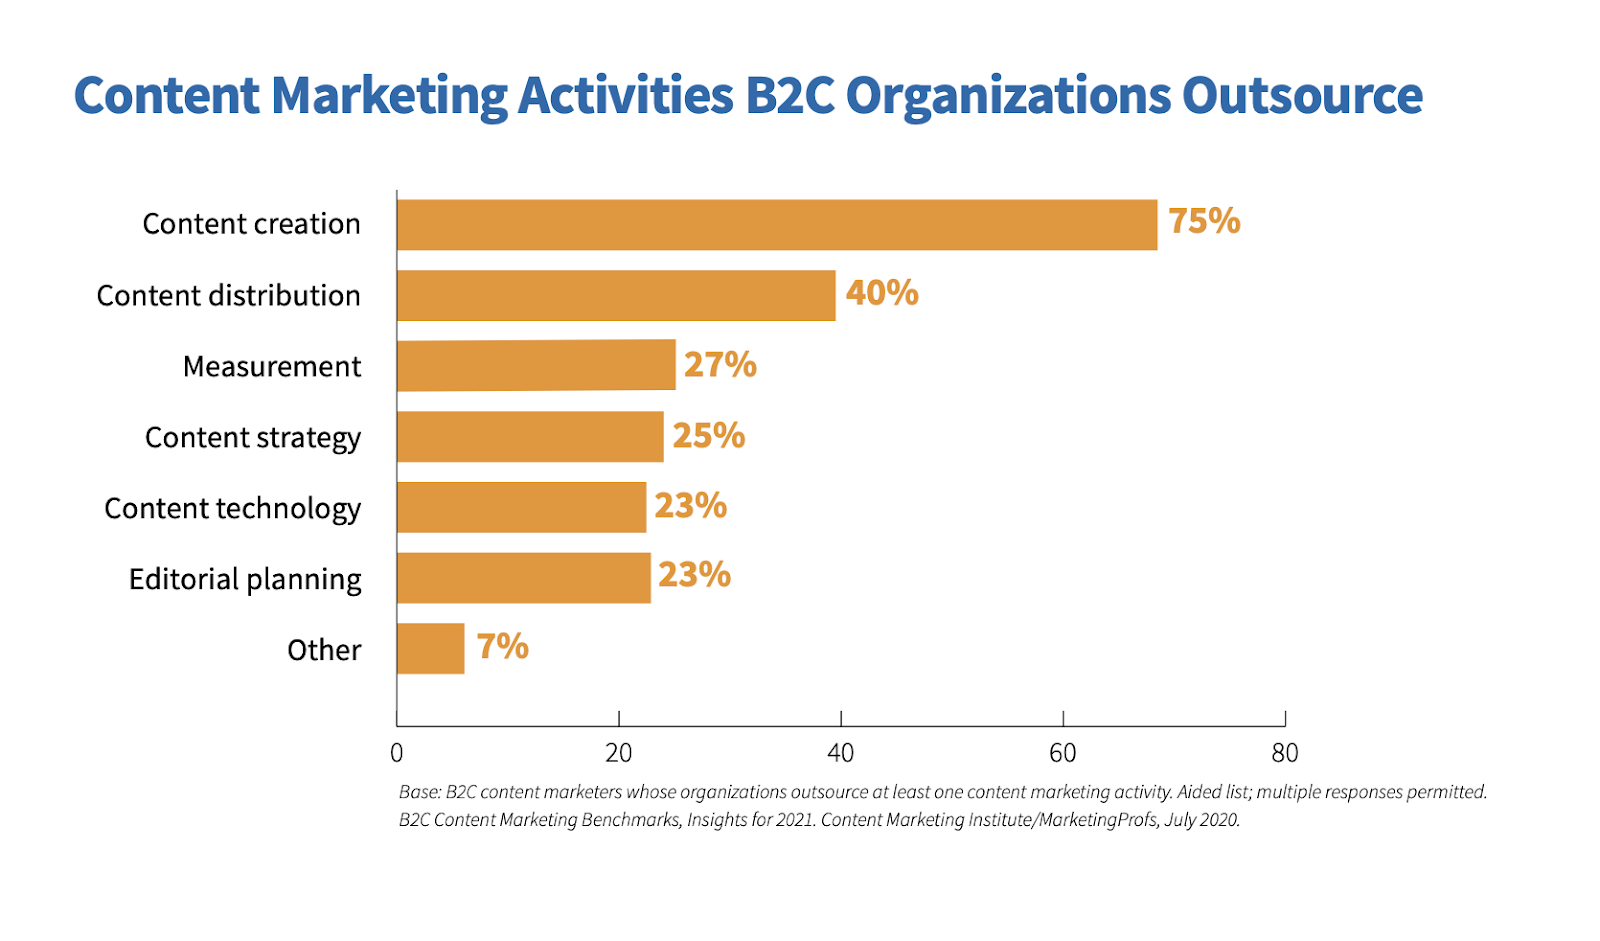 B2C Content Marketing Activties Outsourced